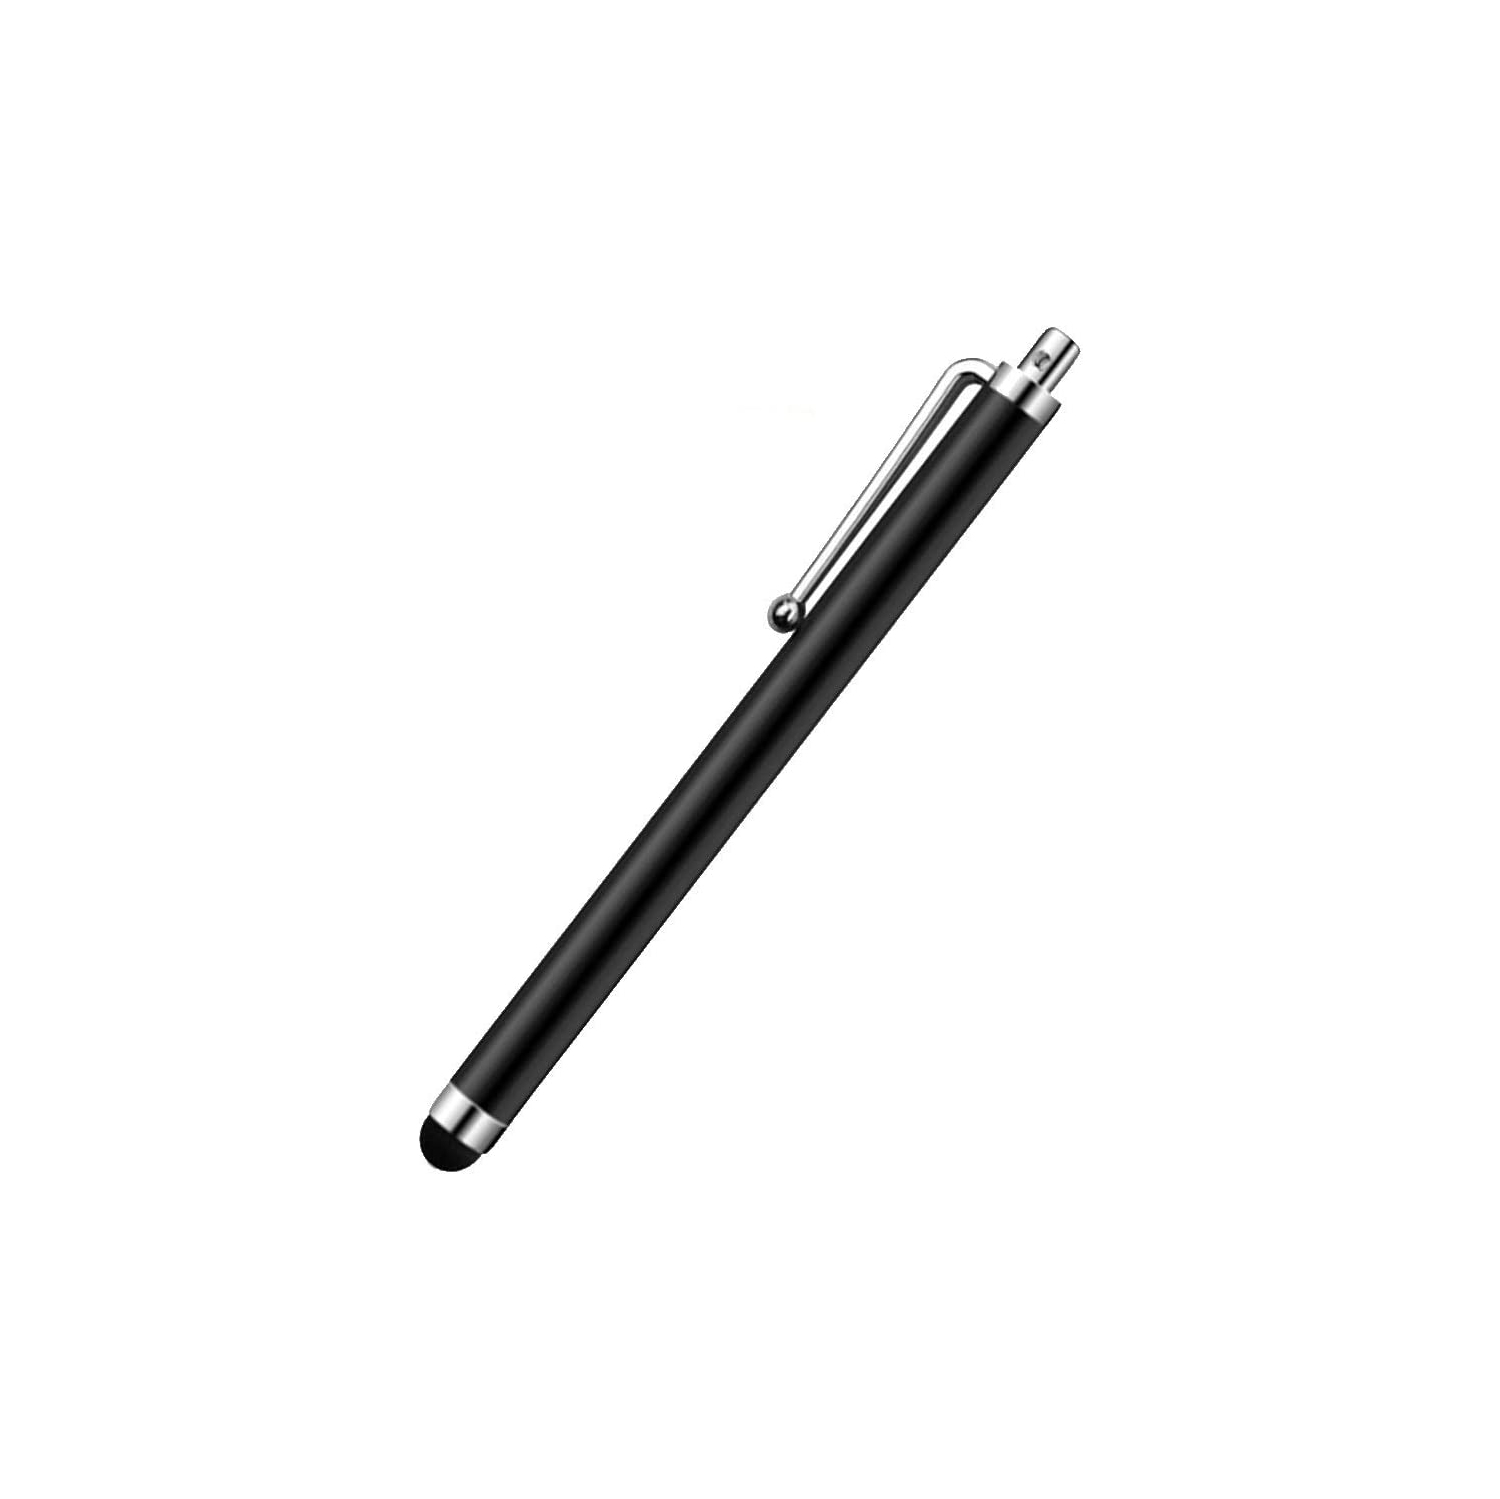 Universal Touch Screen Capacitive Stylus Pen, DETUOSI Universal Touch Screen Capacitive Stylus for ipad iPhone 7/8 Plus/iPhone 11, Samsung S8/S9/S10 Plus/NOTE 8/9, Huawei Lenovo